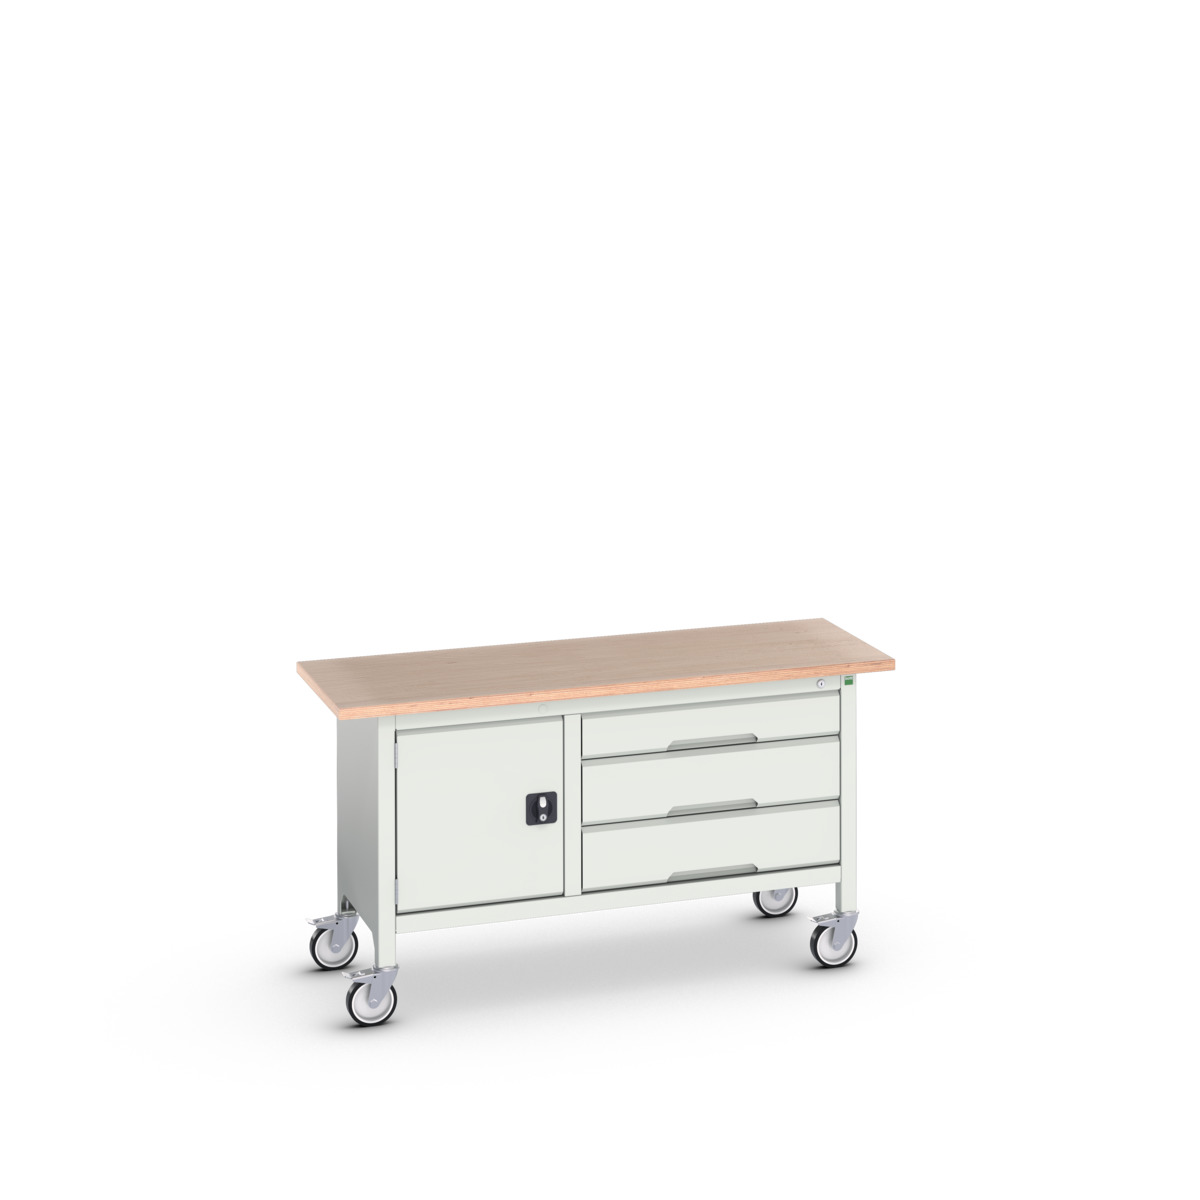 16923214.16 - verso mobile storage bench (mpx)